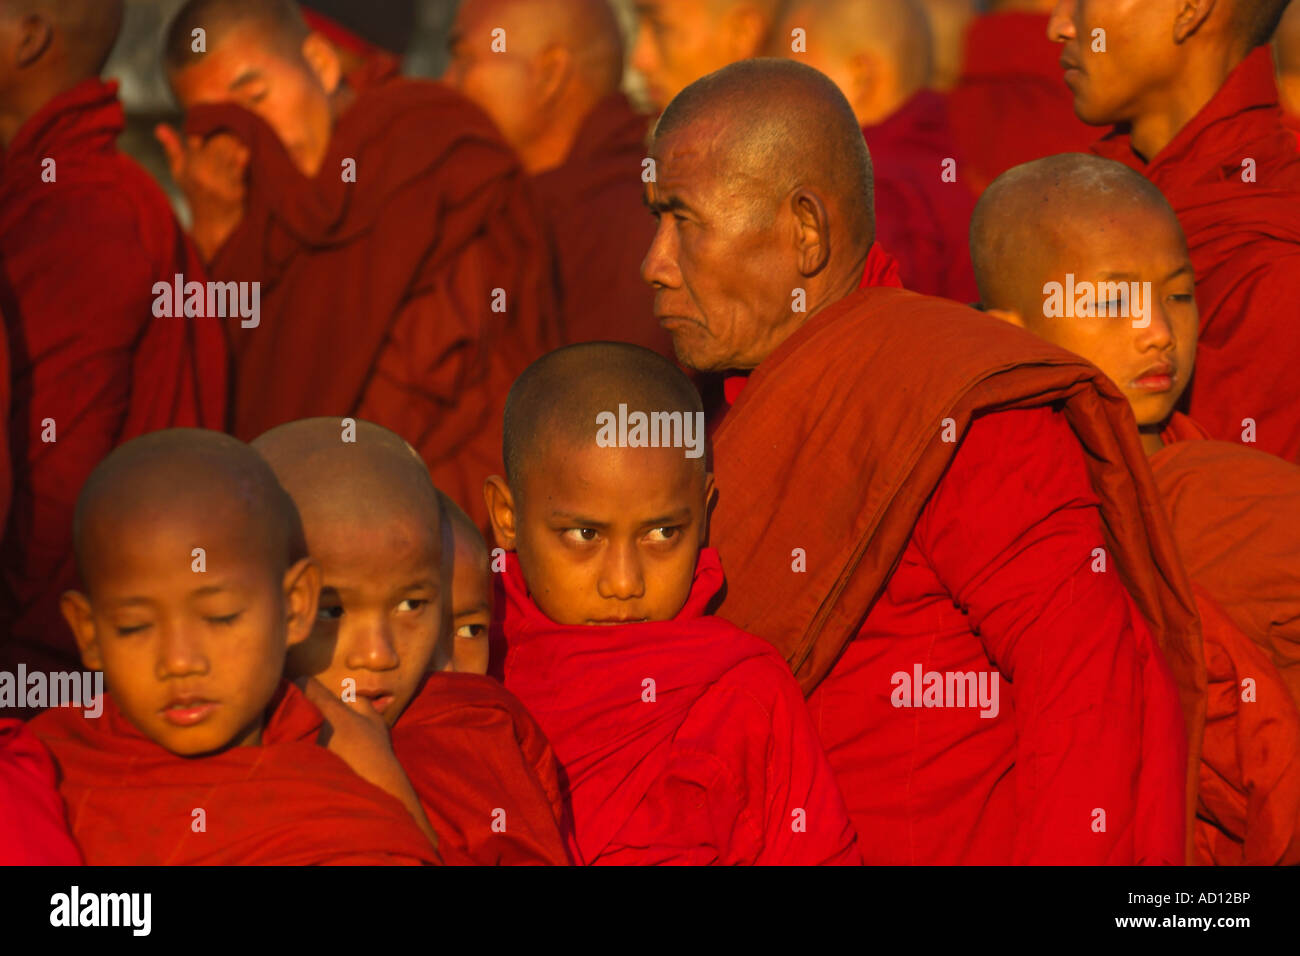 Myanmar, Bagan, Old Bagan, Ananda Pahto (Temple) Ananda festival, Monks iwaitng in a long line to collect alms Stock Photo